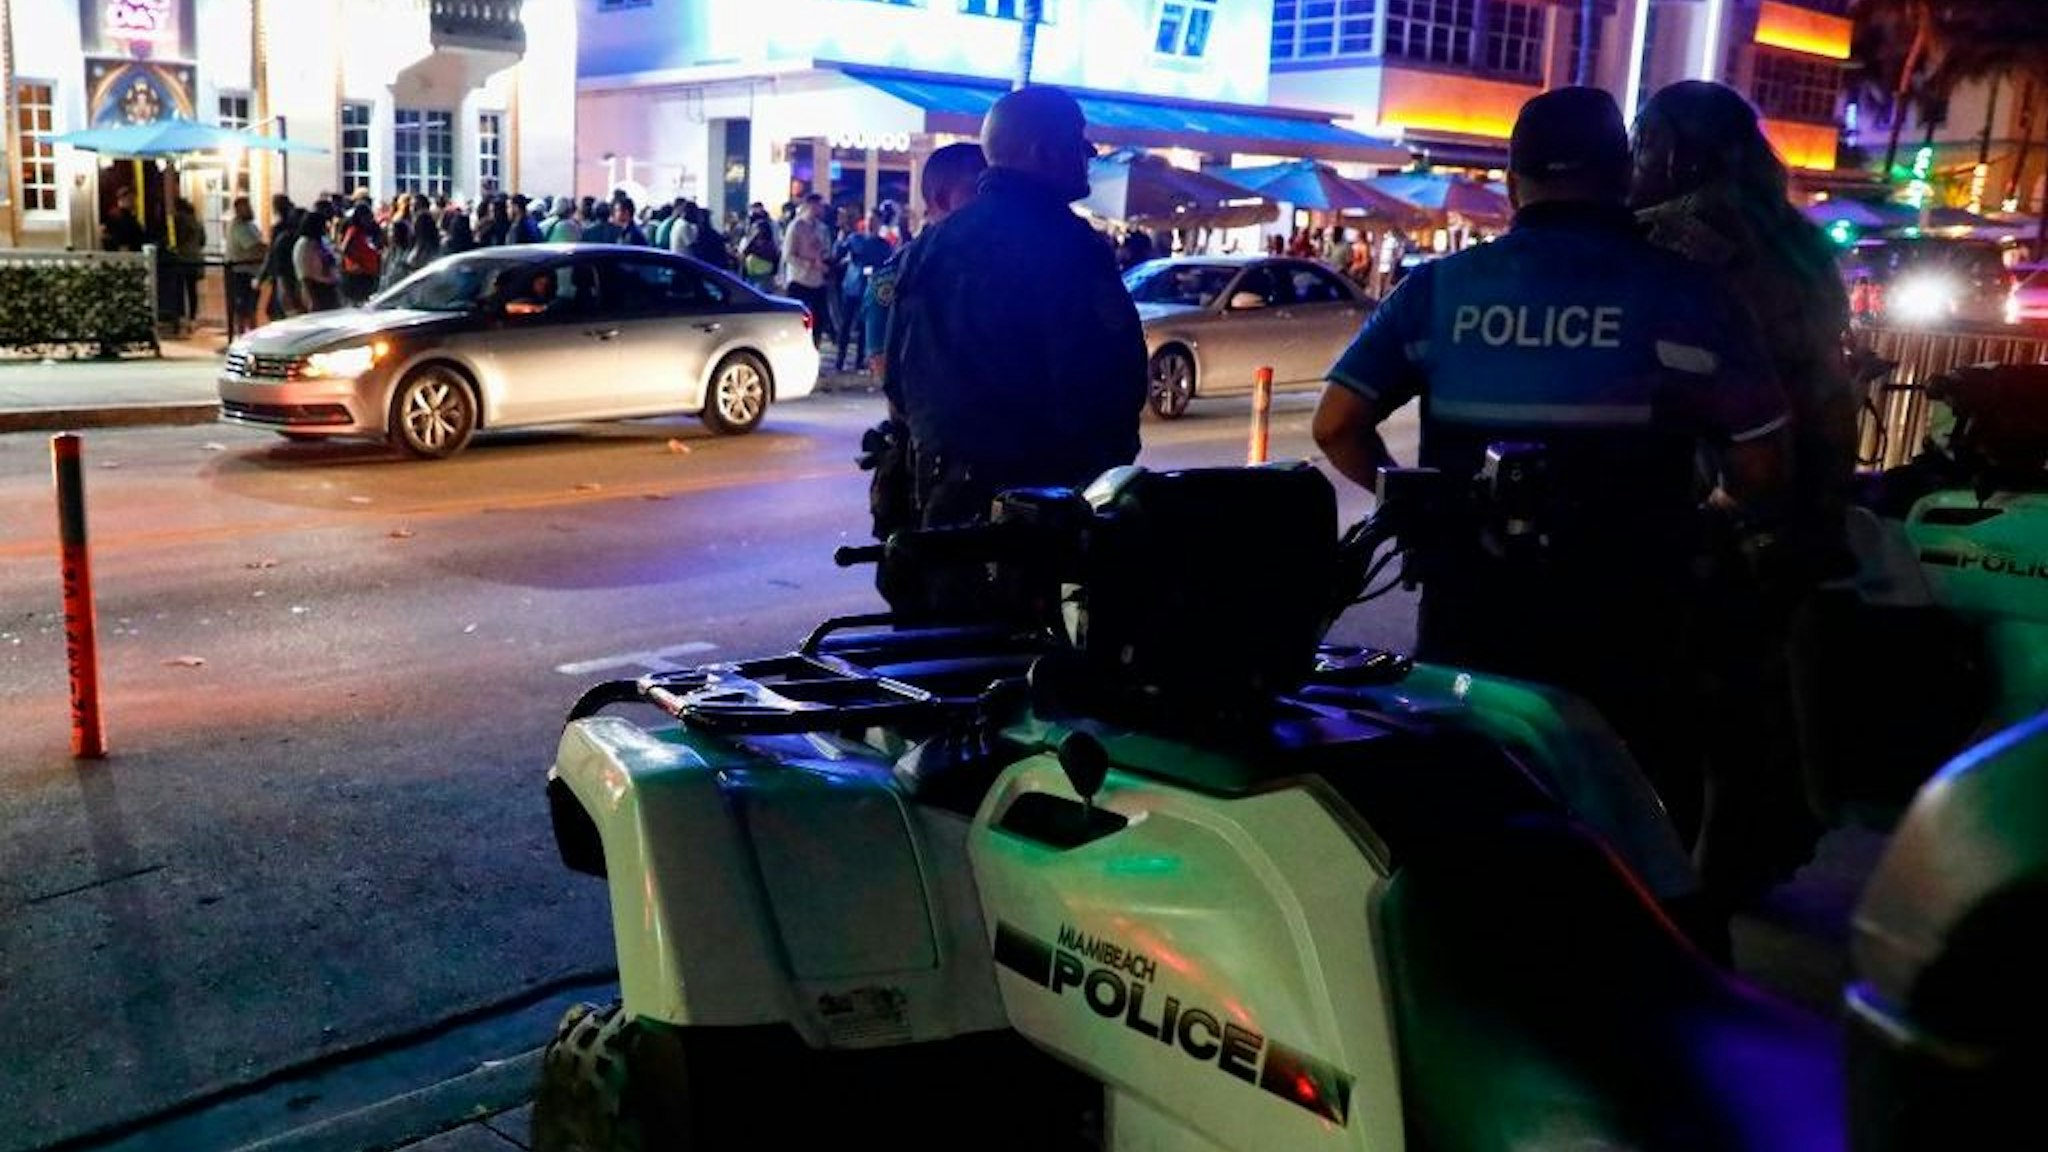 Miami Beach police officers stand across the street from the night clubs and hotels on Ocean Drive in South Beach, Florida on March 22, 2019. - The excesses of students celebrating Spring Break have reached a point that is forcing Miami Beach officials to deploy anti-riot police to quell the party. Police are also promising to stop turning a blind eye to drinking alcohol on the beach and the smoking of marijuana. (Photo by RHONA WISE / AFP)